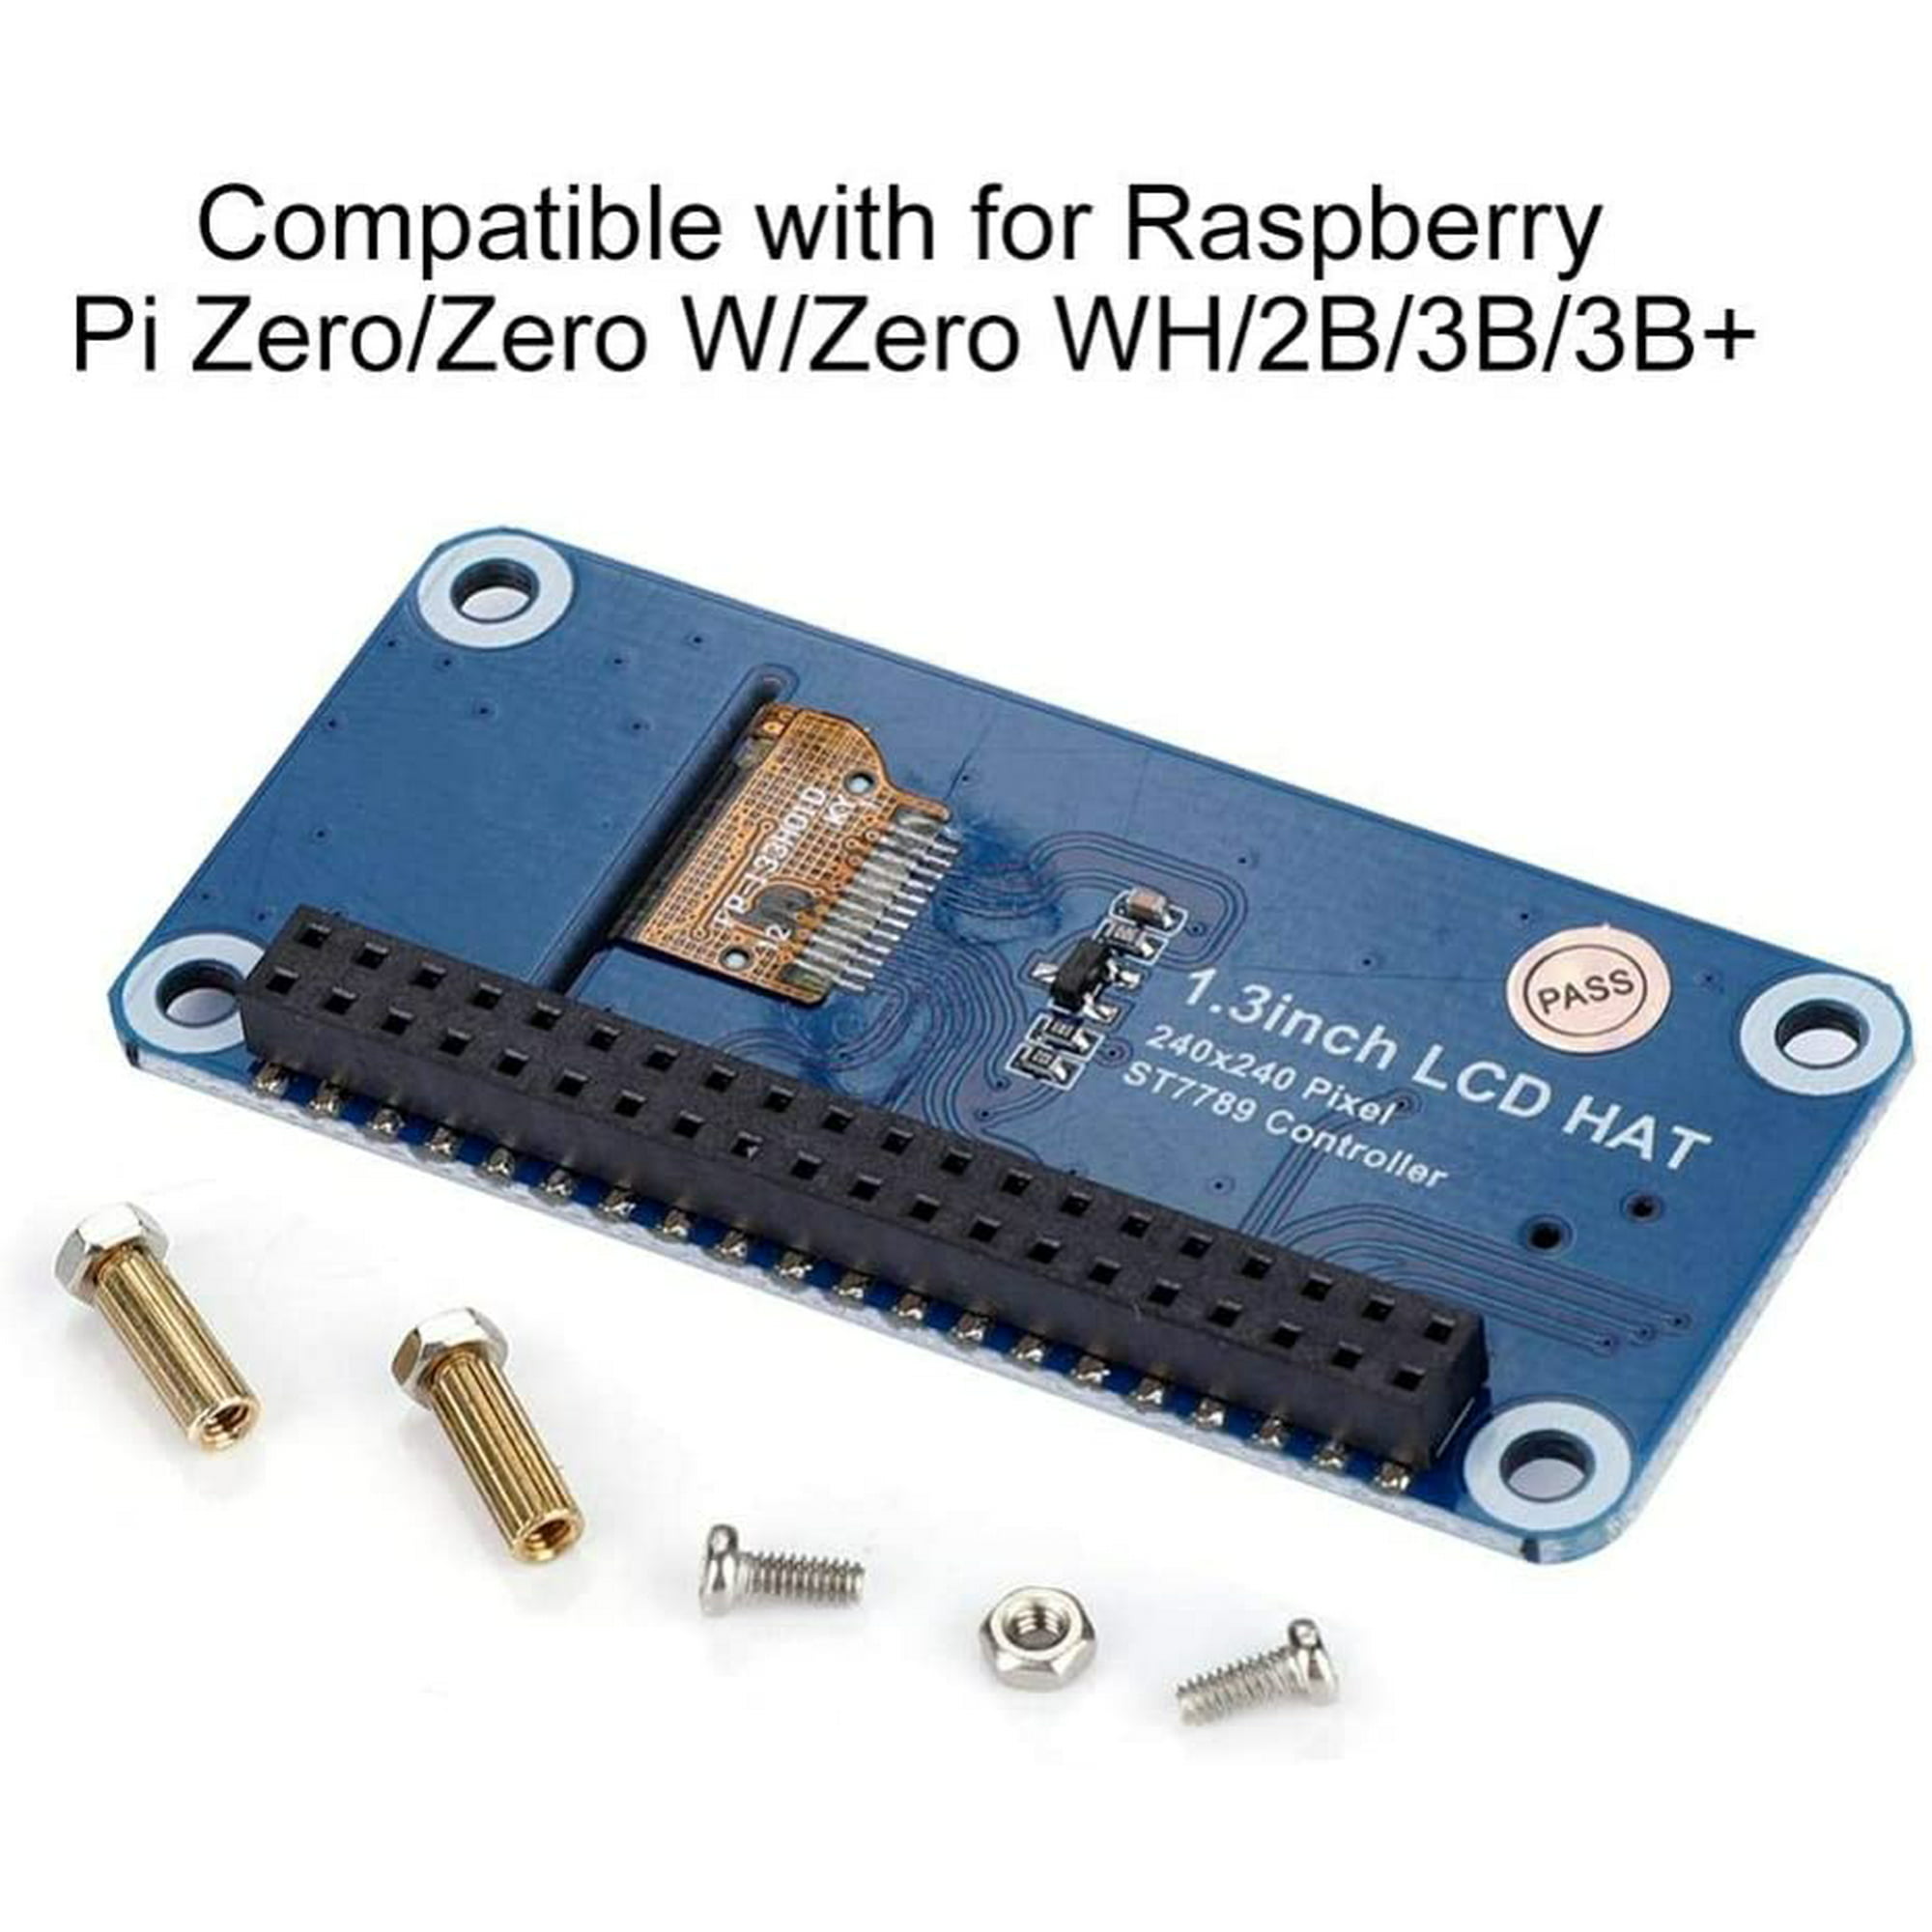 with Examples for Raspberry Pi/Arduino/STM32 Driver ST7789 waveshare 1.3inch IPS LCD Display HAT 240x240 Pixel SPI Interface for Raspberry Pi Zero/Zero W/Zero WH/2B/3B/3B 